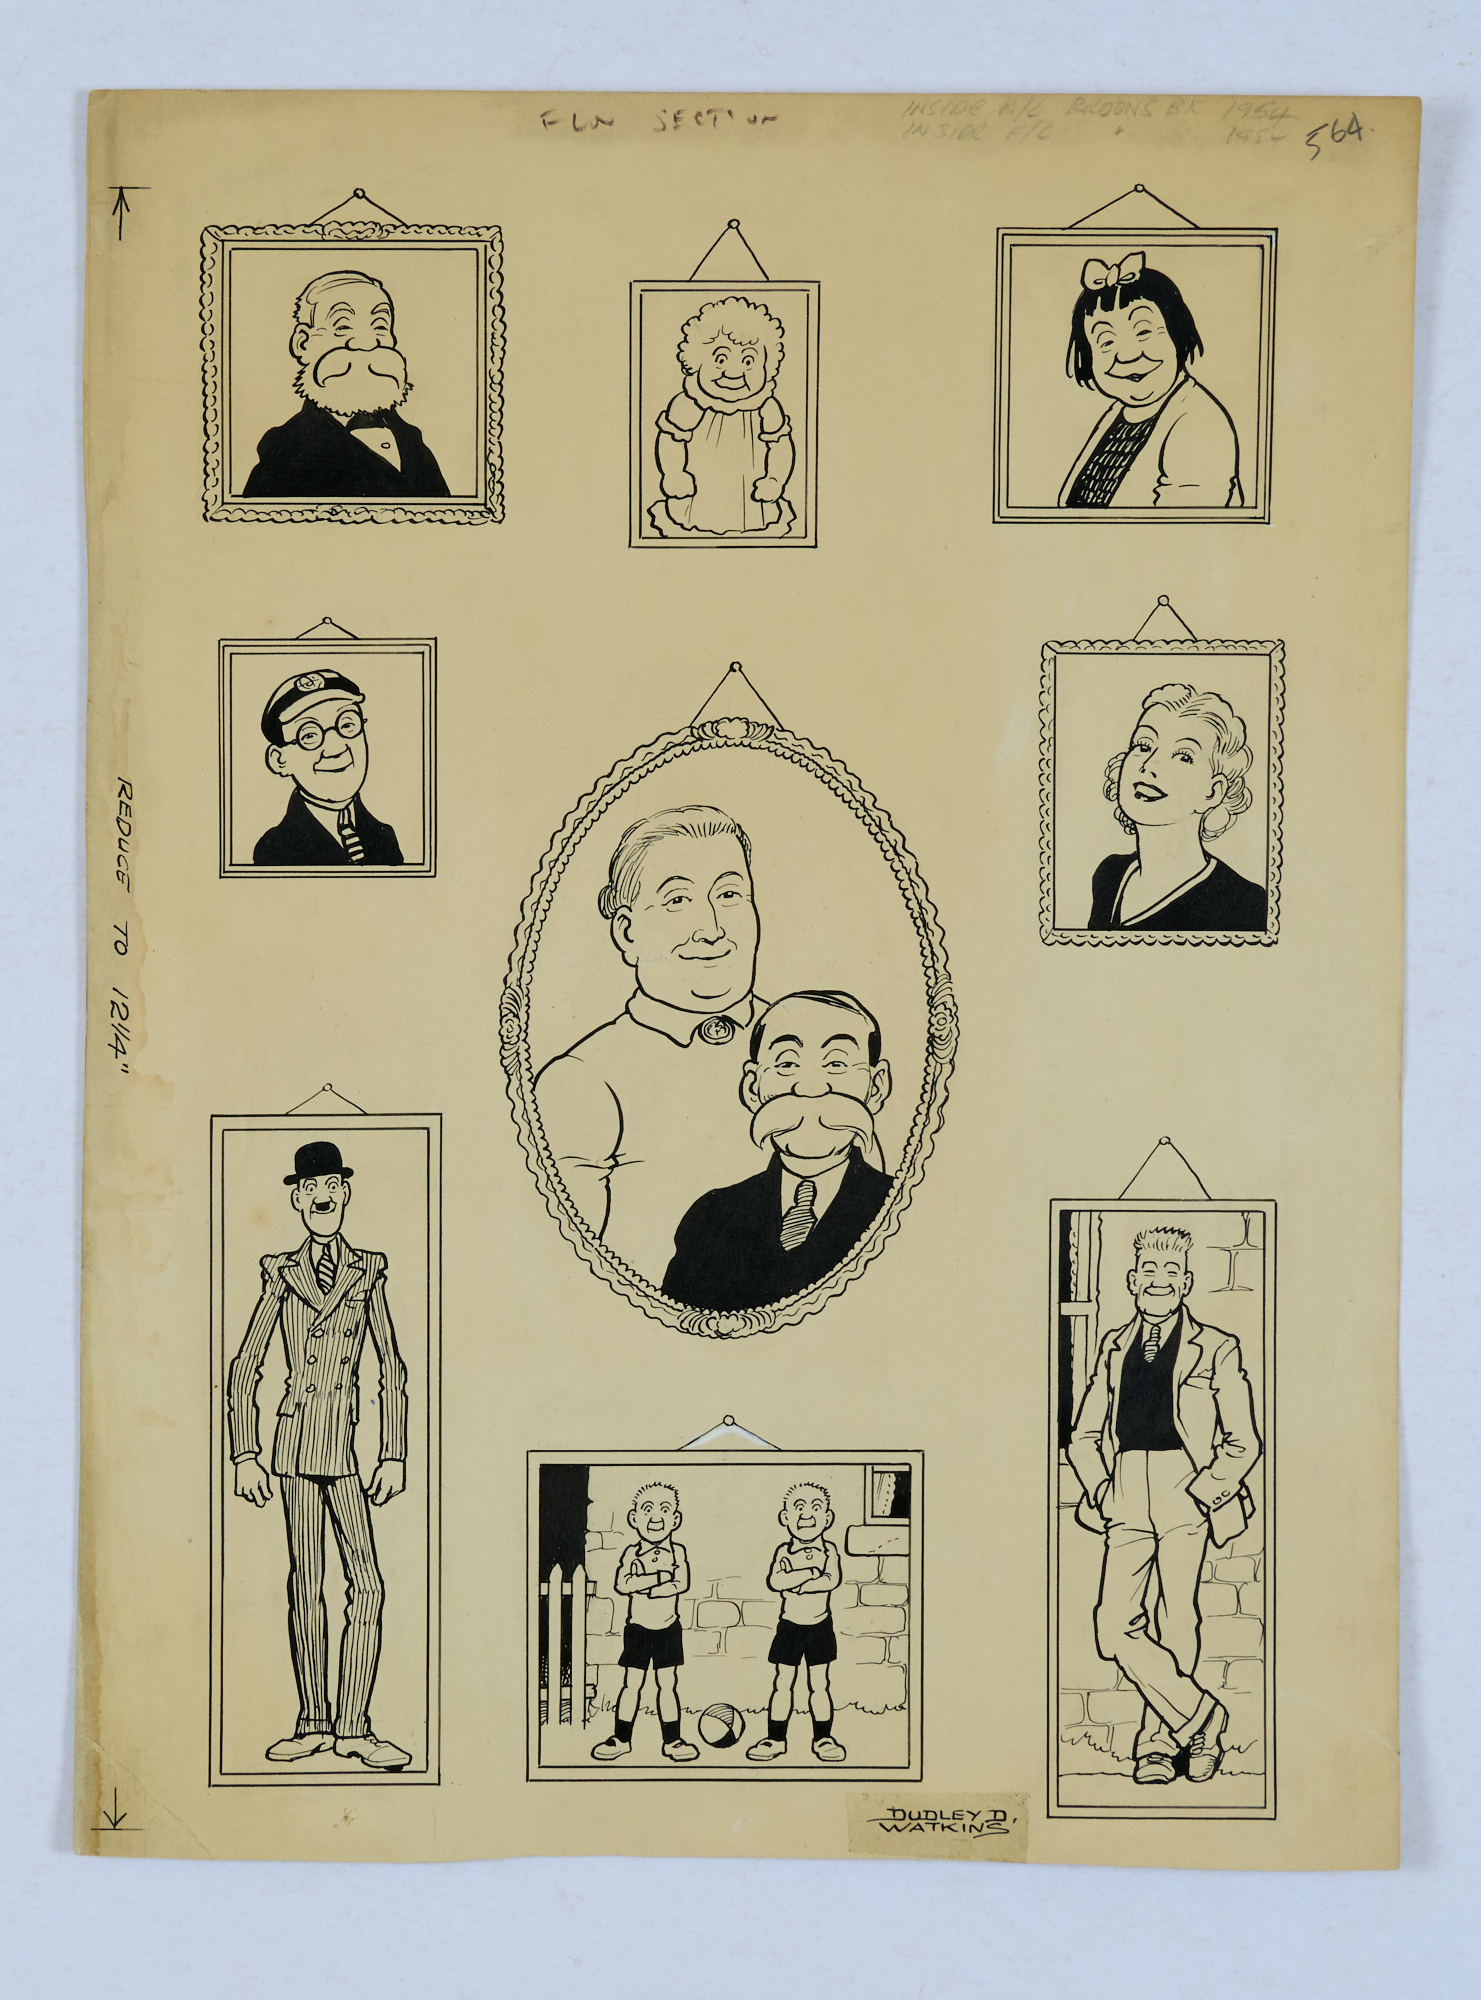 The Broons Family Portraits original artwork (1953) by Dudley Watkins for the inside front/back